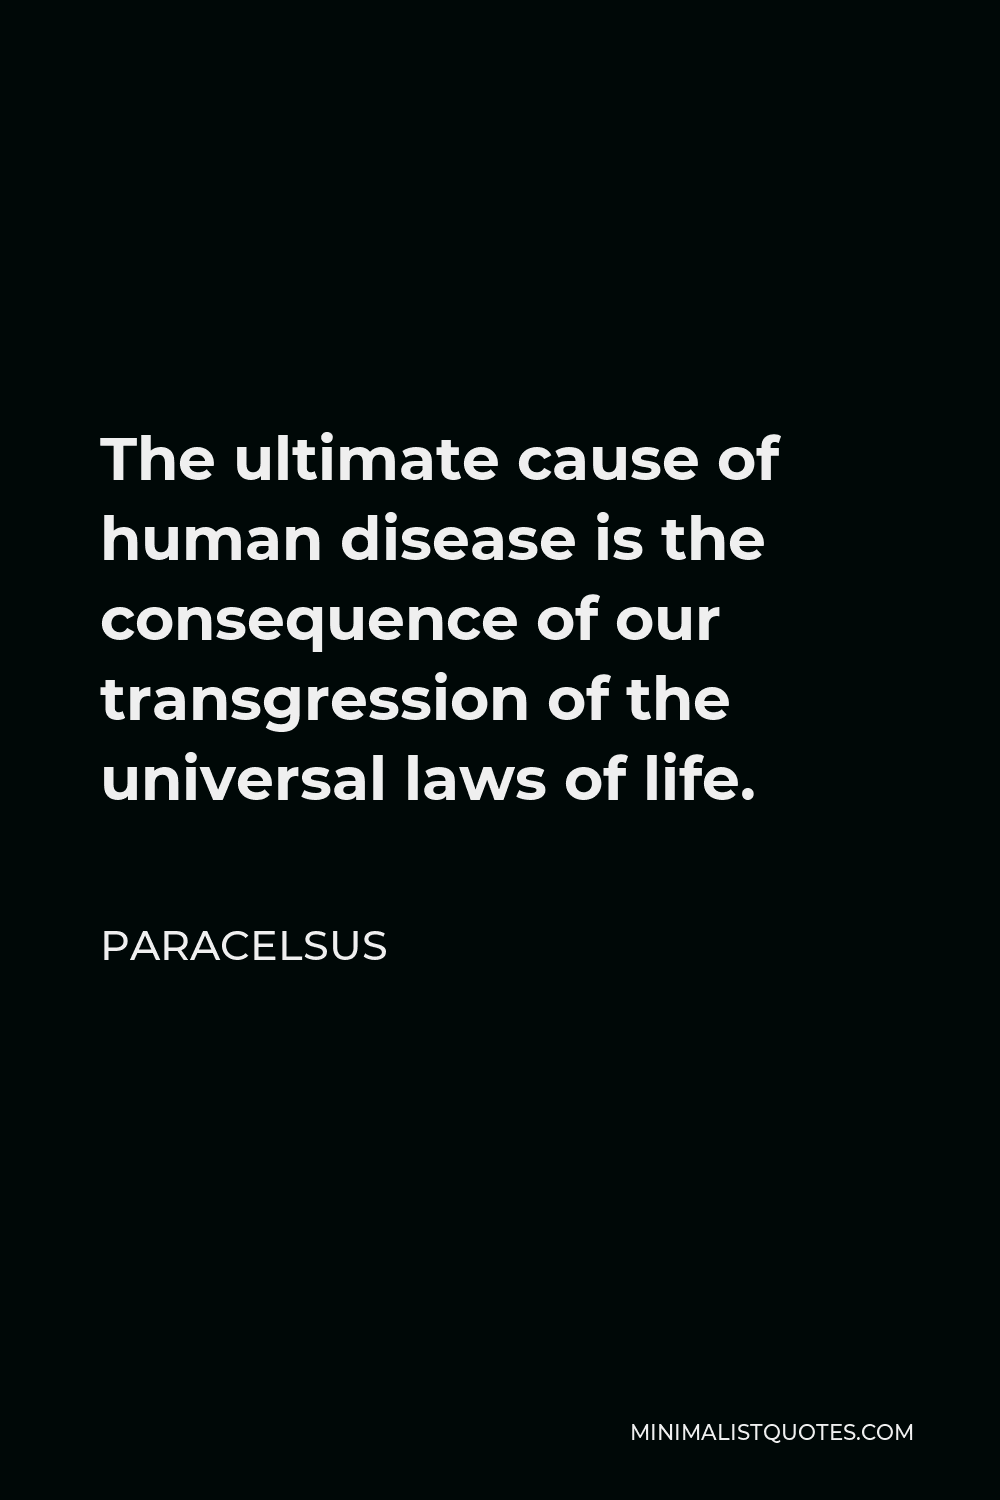 Paracelsus Quote - The ultimate cause of human disease is the consequence of our transgression of the universal laws of life.